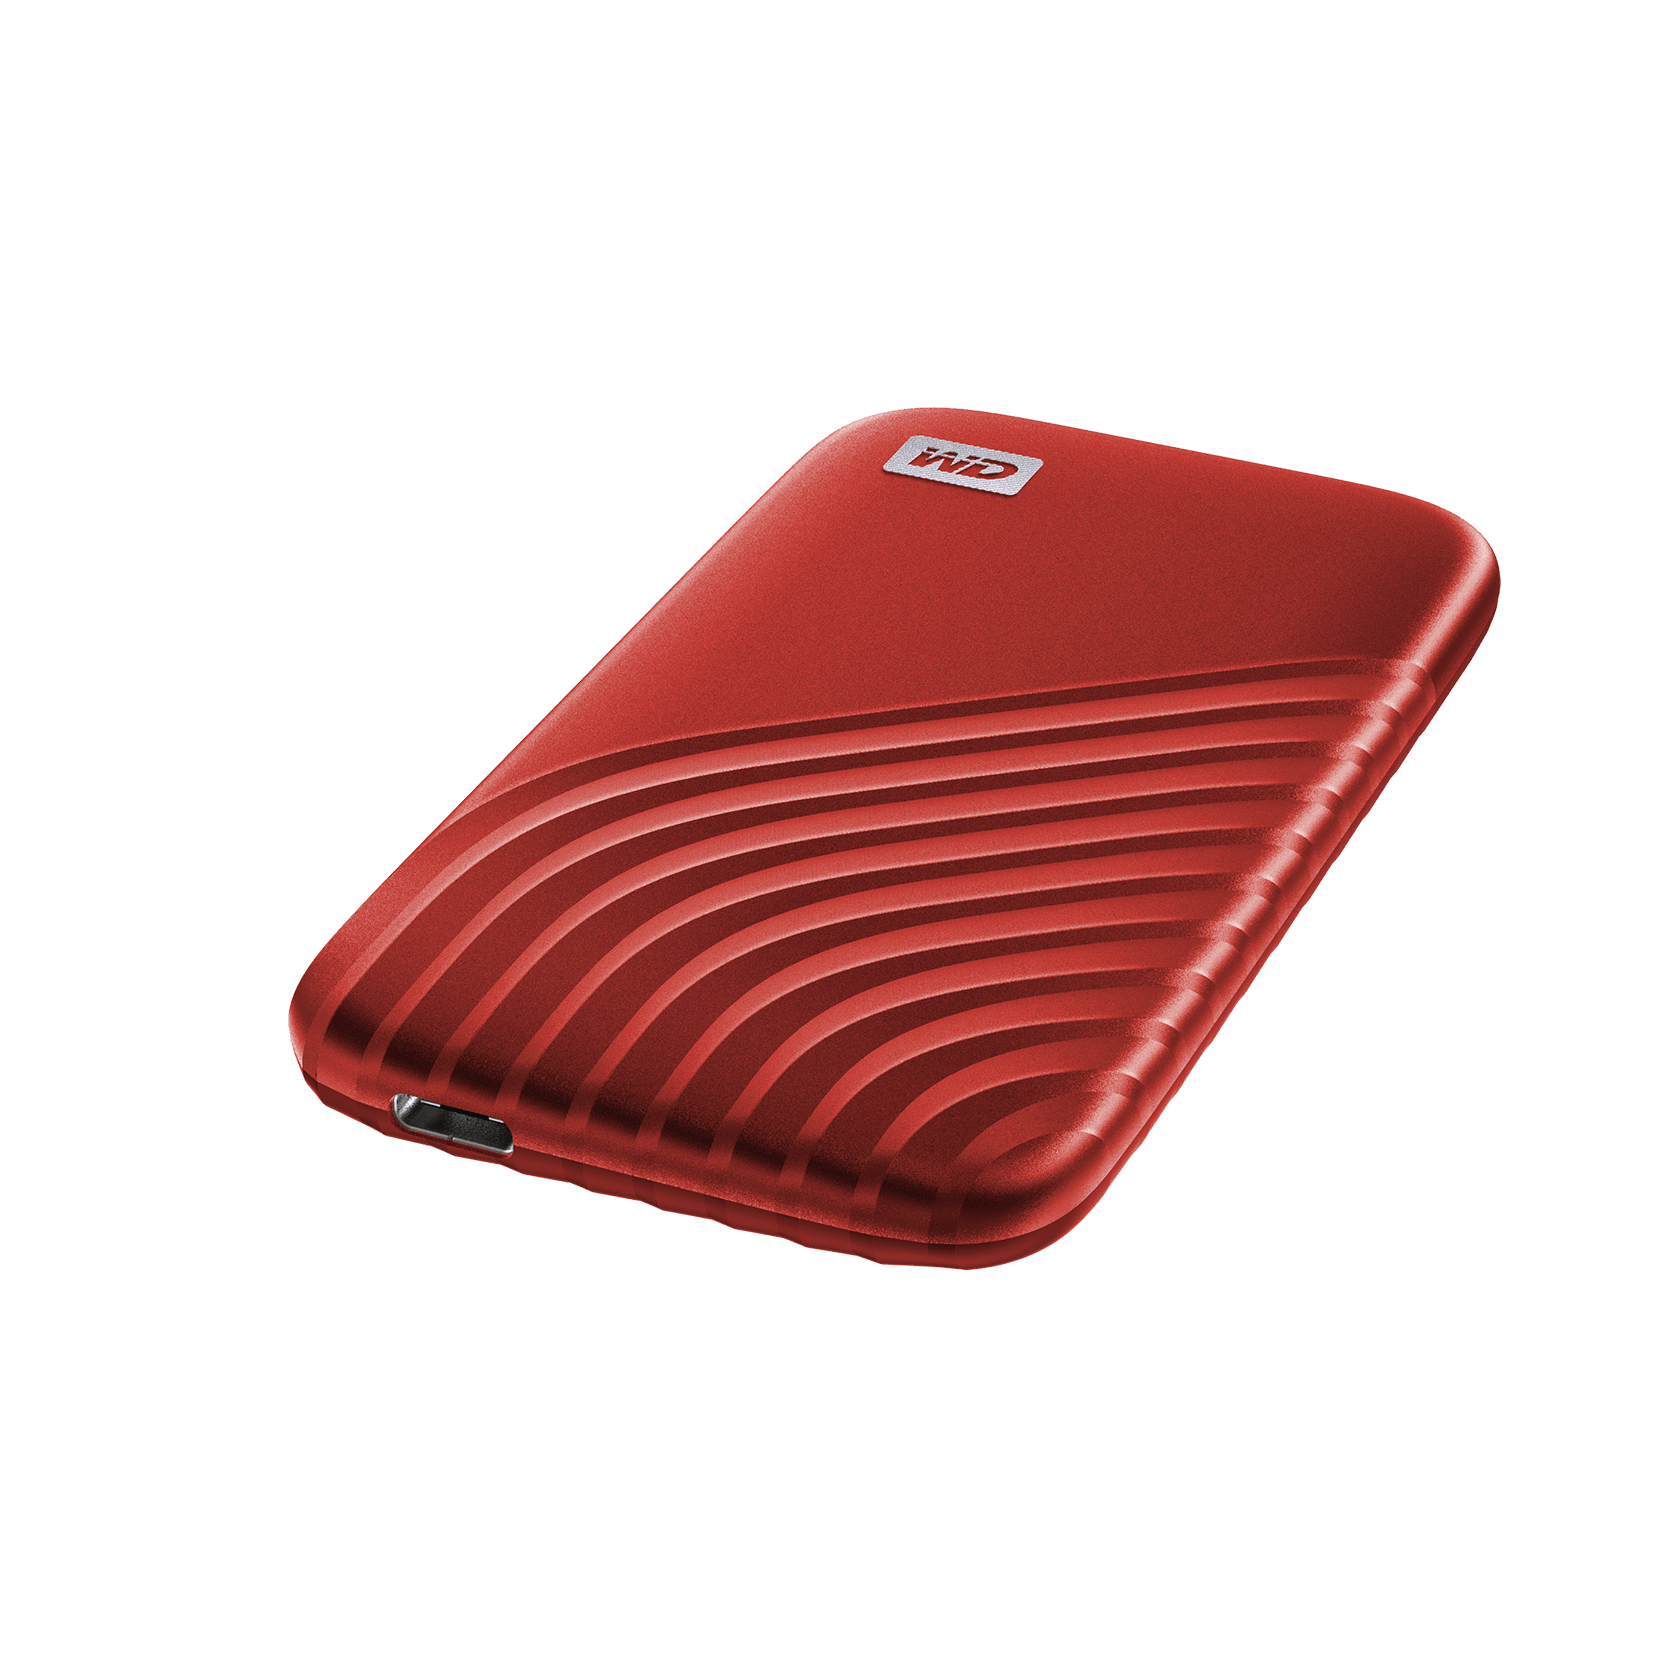 WD 1TB My Passport SSD, Portable External Solid State Drive, Red - WDBAGF0010BRD-WESN - image 4 of 8